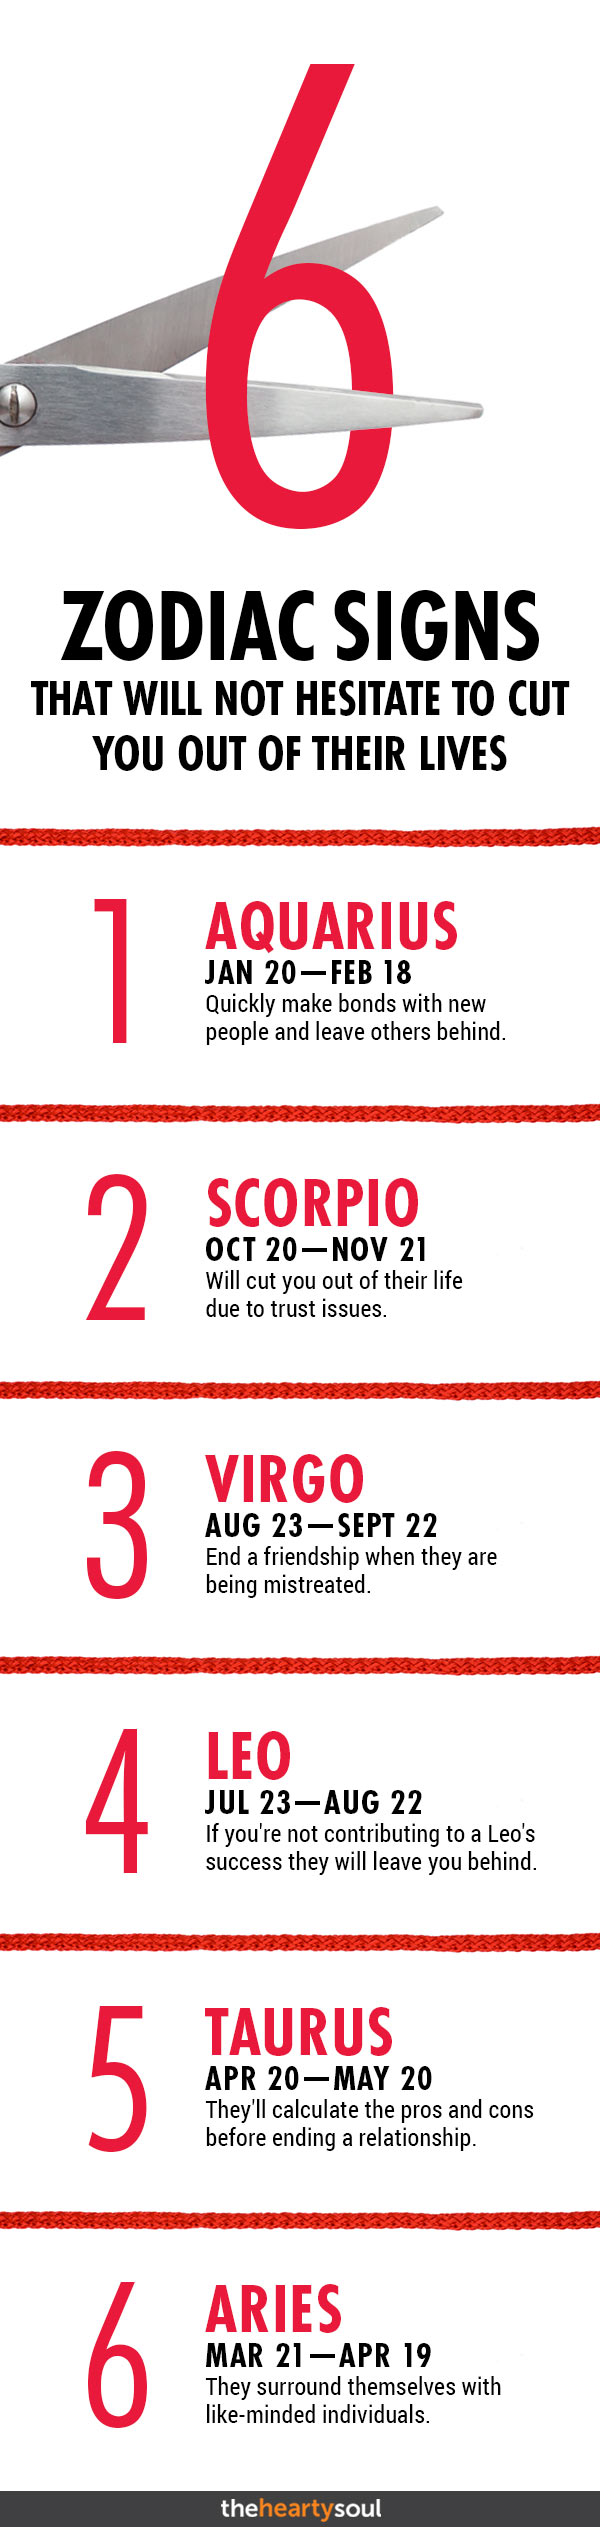 6 Zodiac Signs that will cut you out of their lives